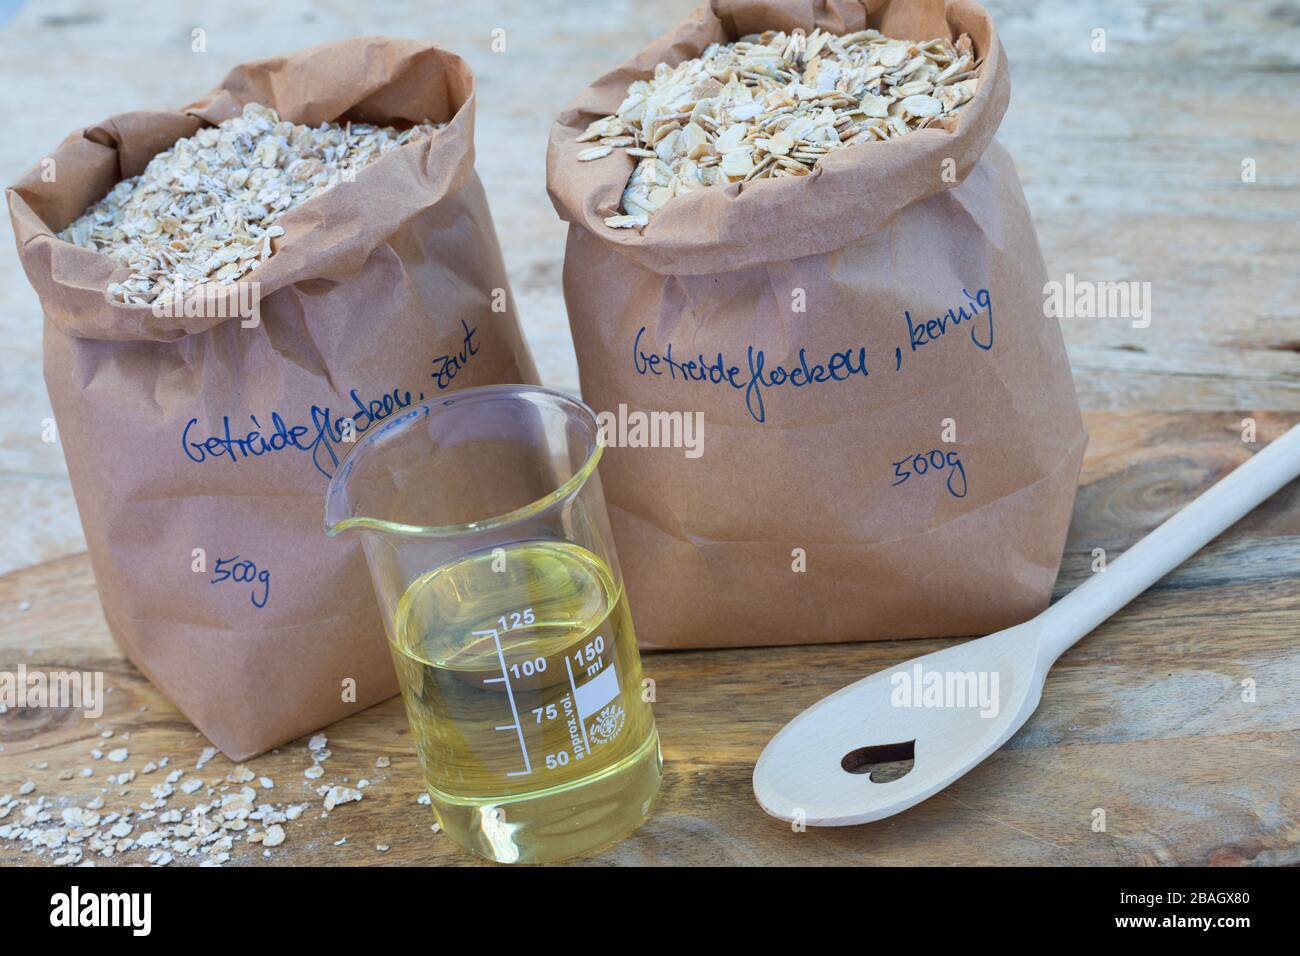 making bird seed with cereal and oil, series picture 1/4 Stock Photo